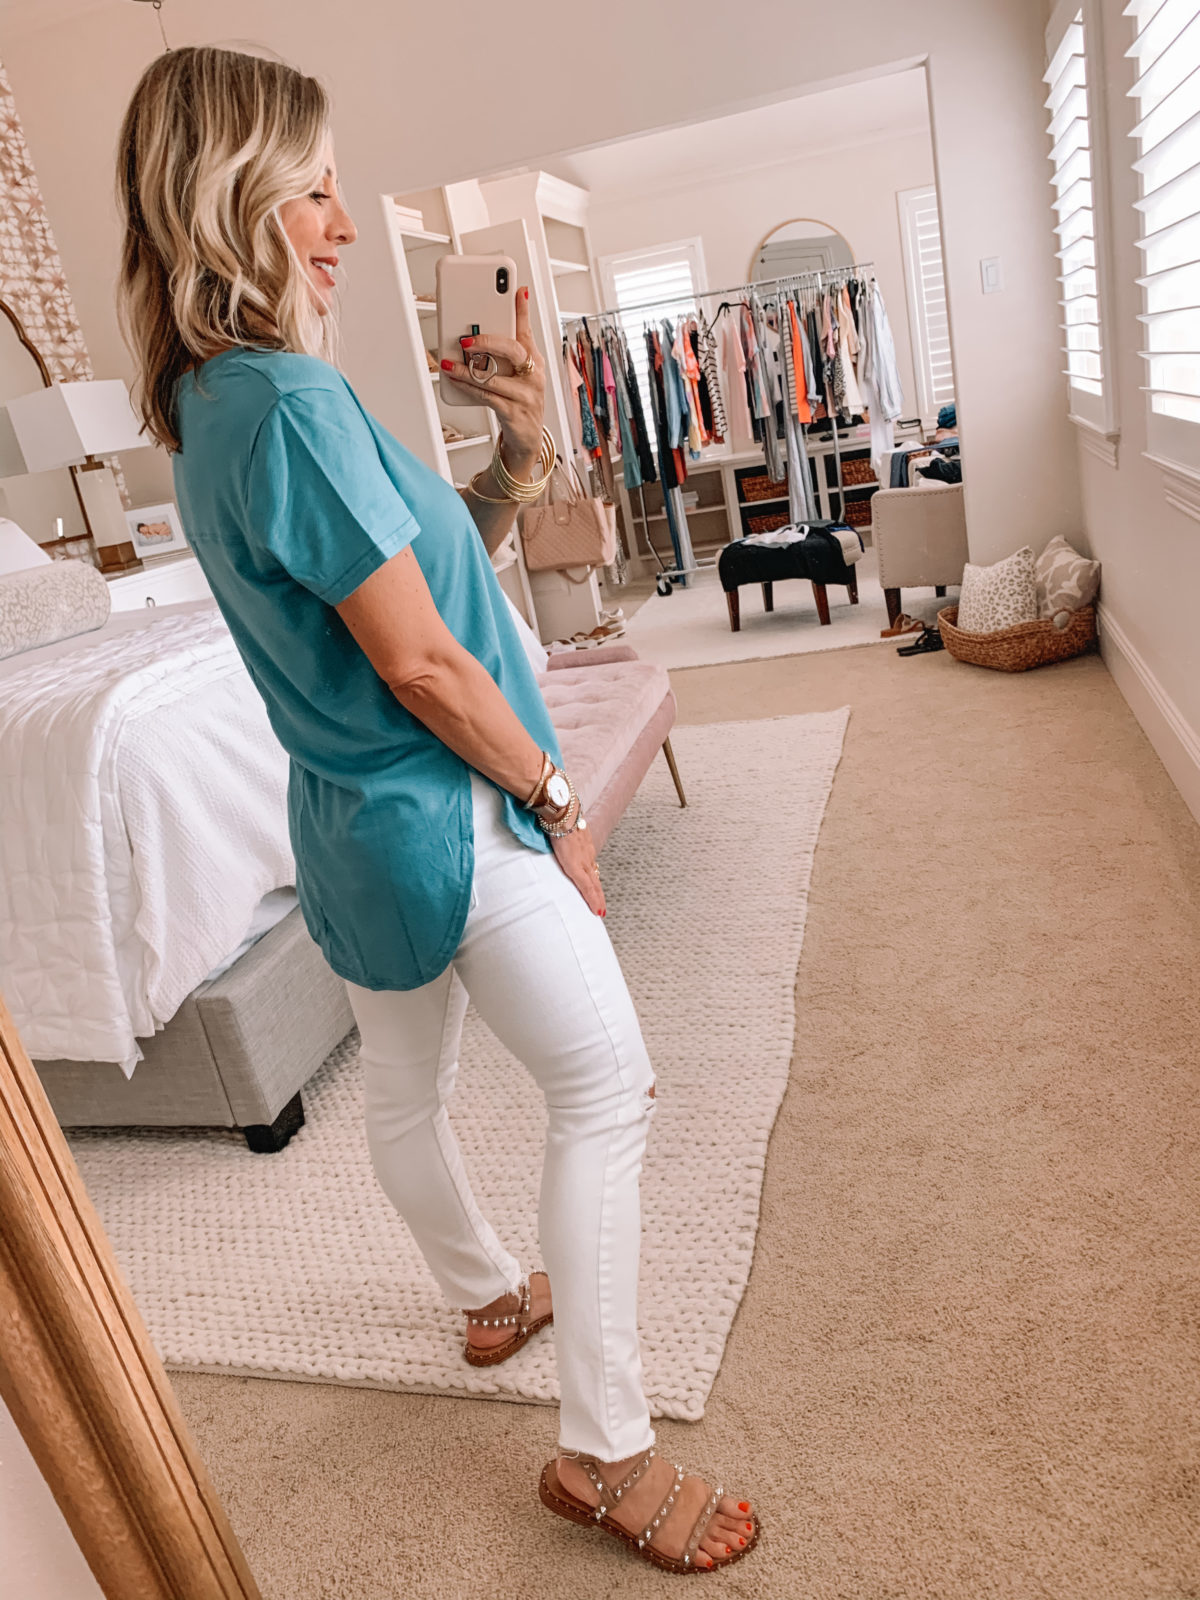 Amazon Fashion Finds, V-Neck Tunic Top, White Jeans, Studded Sandals